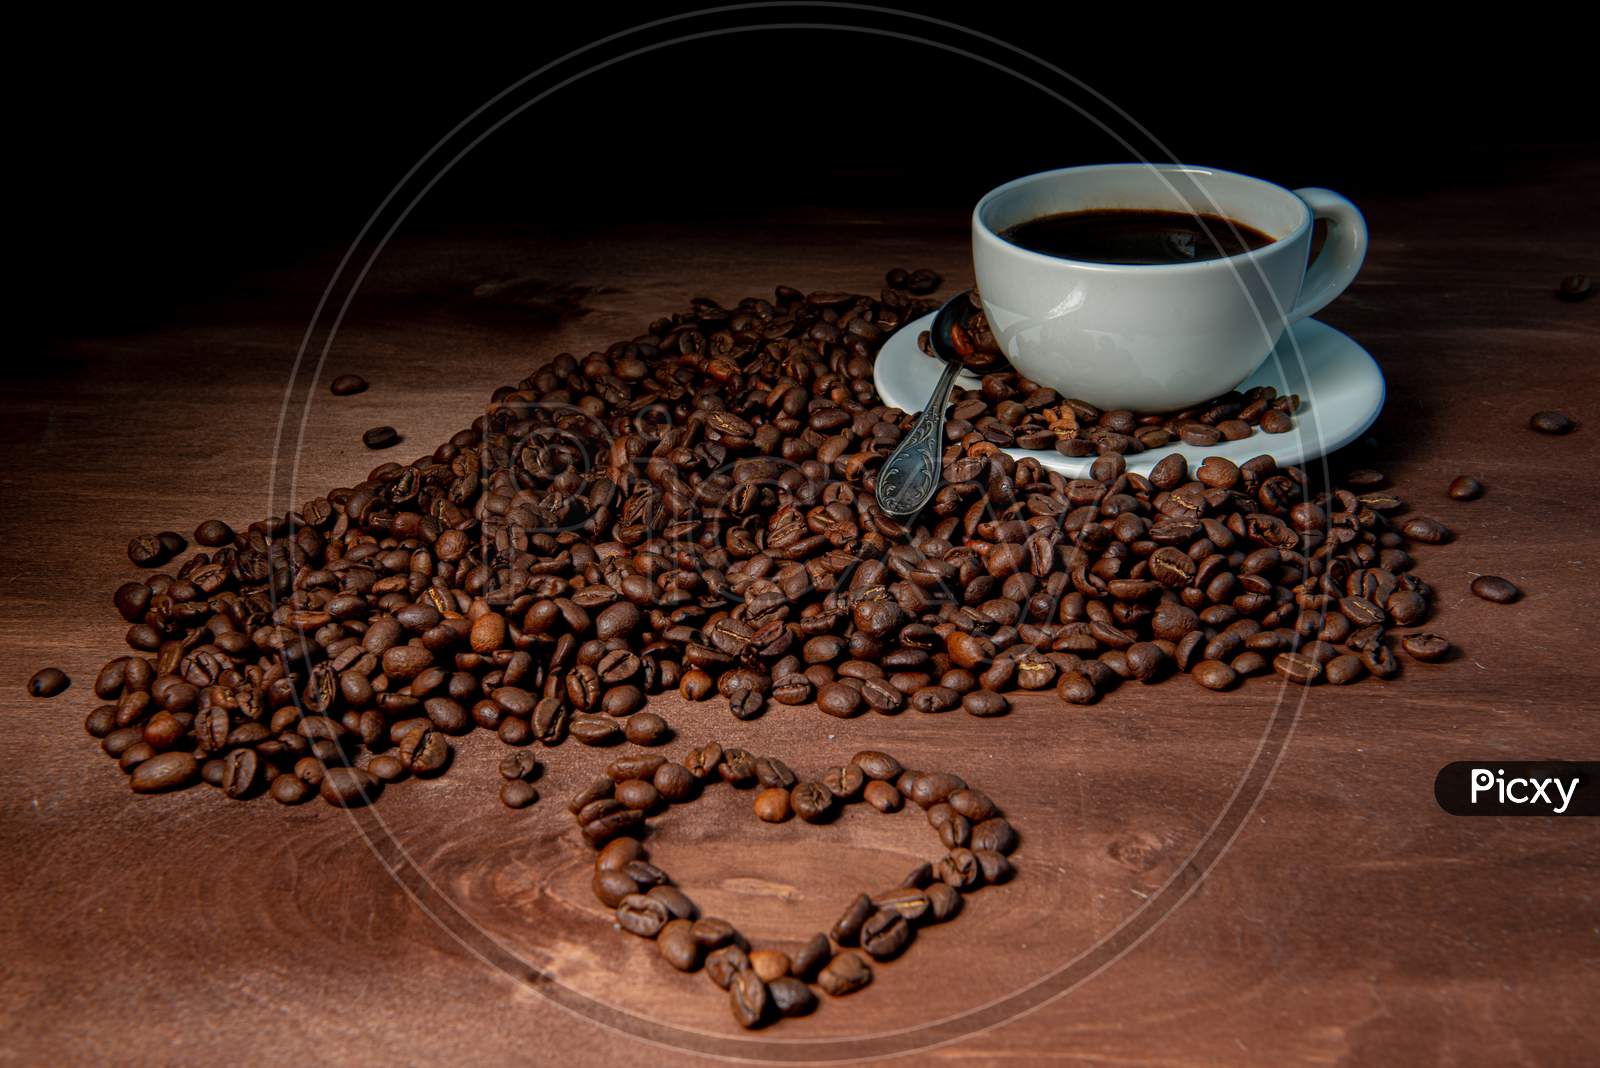 White Coffee Mug And Coffee Beans On The Dark Wooden Background, Heart Shape From Coffee Beans In The Foreground - Image